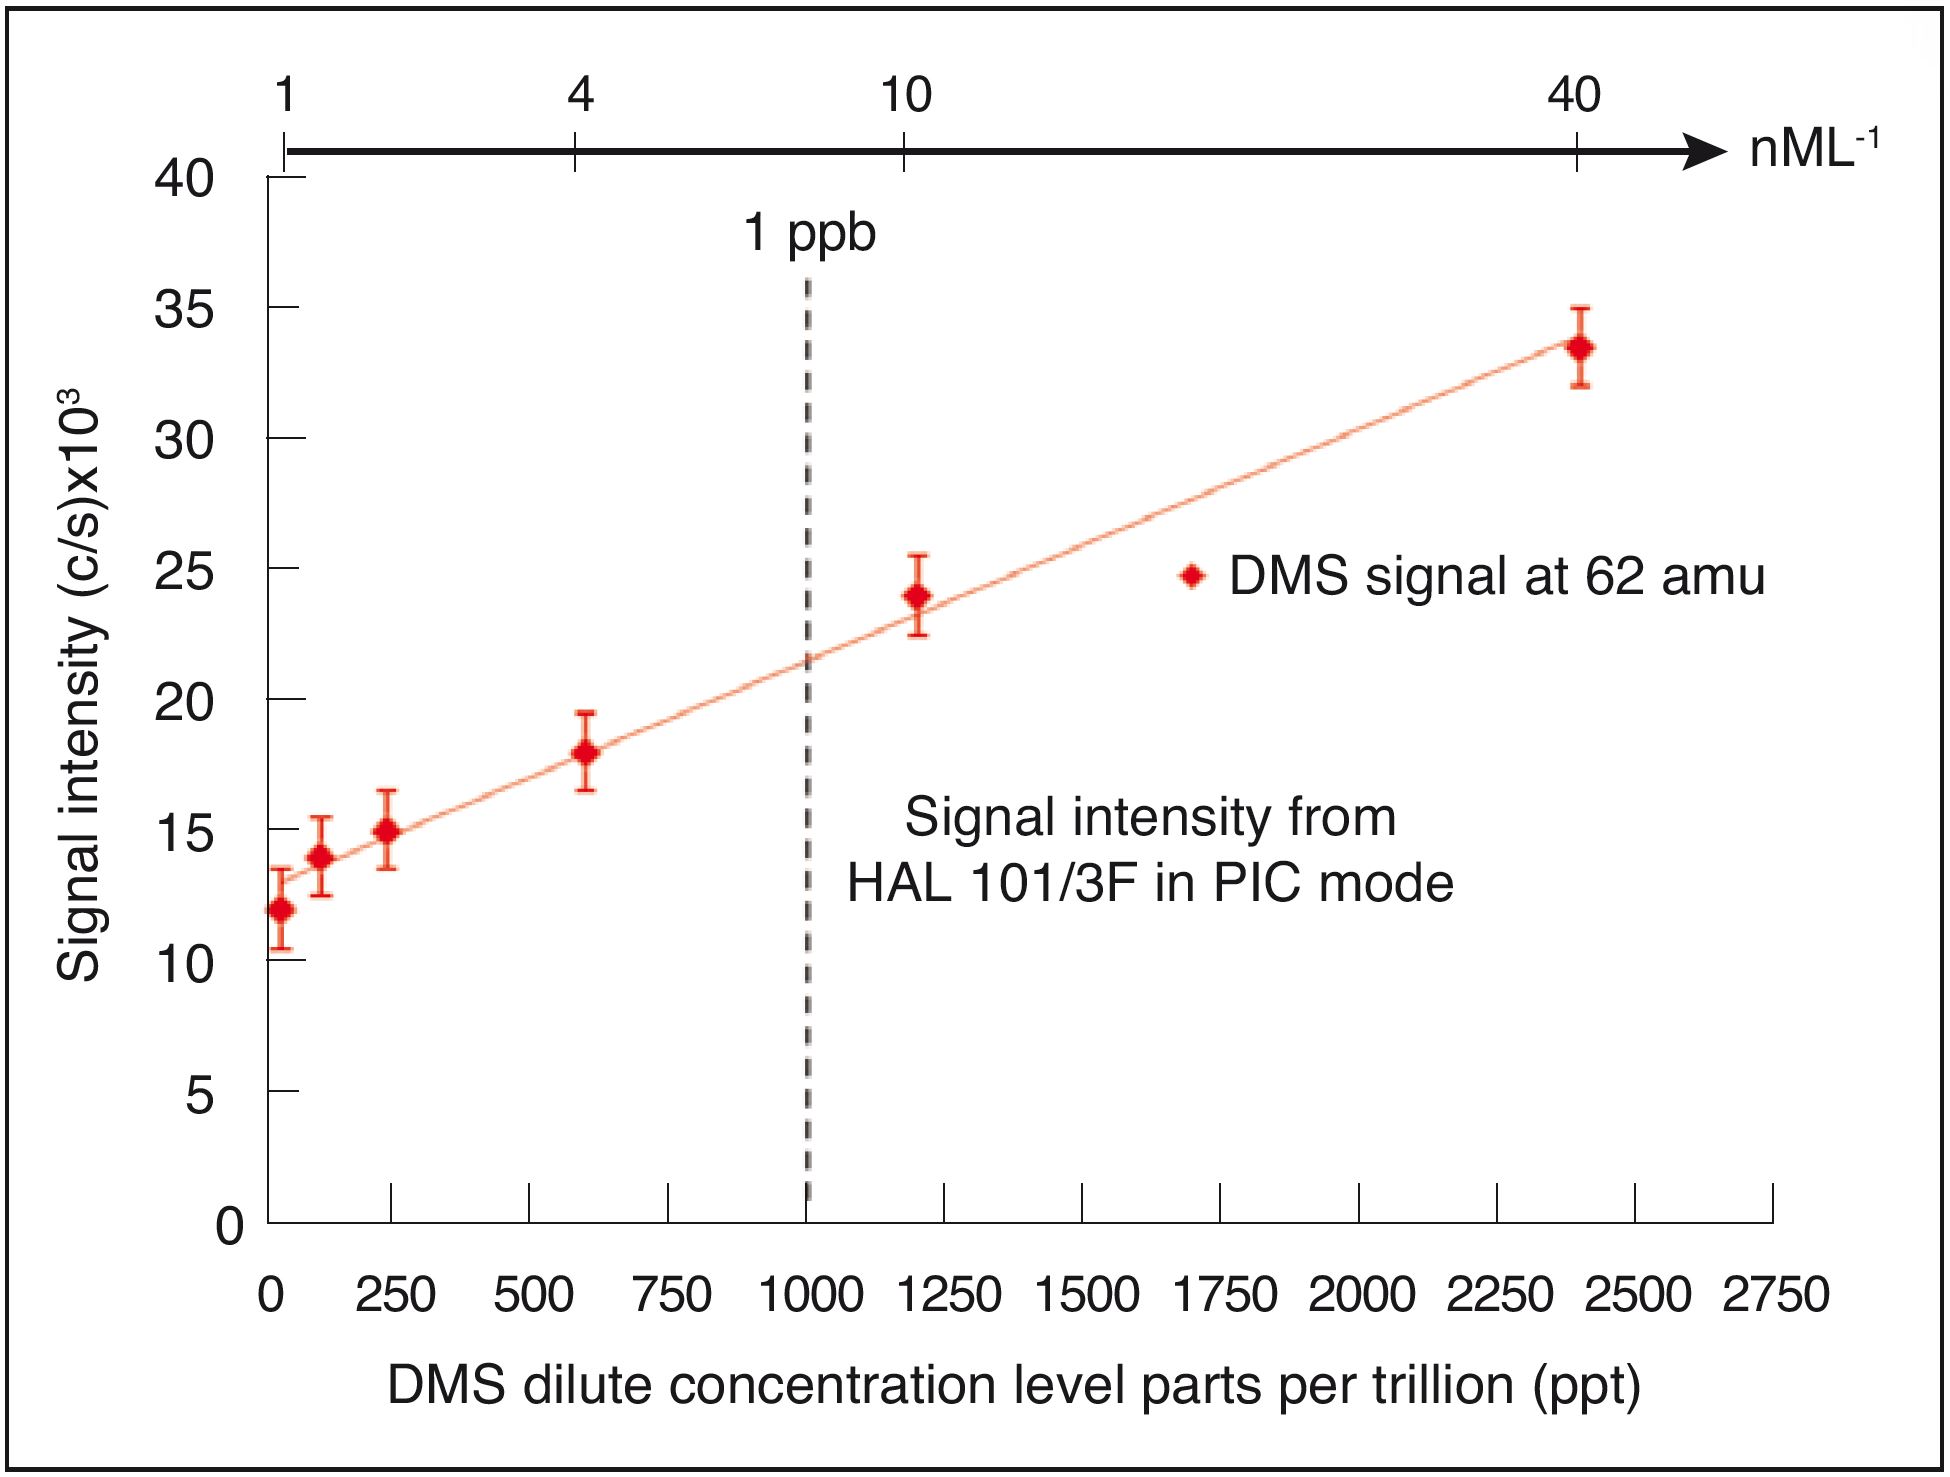 Figure 1 (a & b): Mass scan of dilute concentration levels of DMS and the concentration levels (ppt) derived from DMS partial pressure at 62 amu.